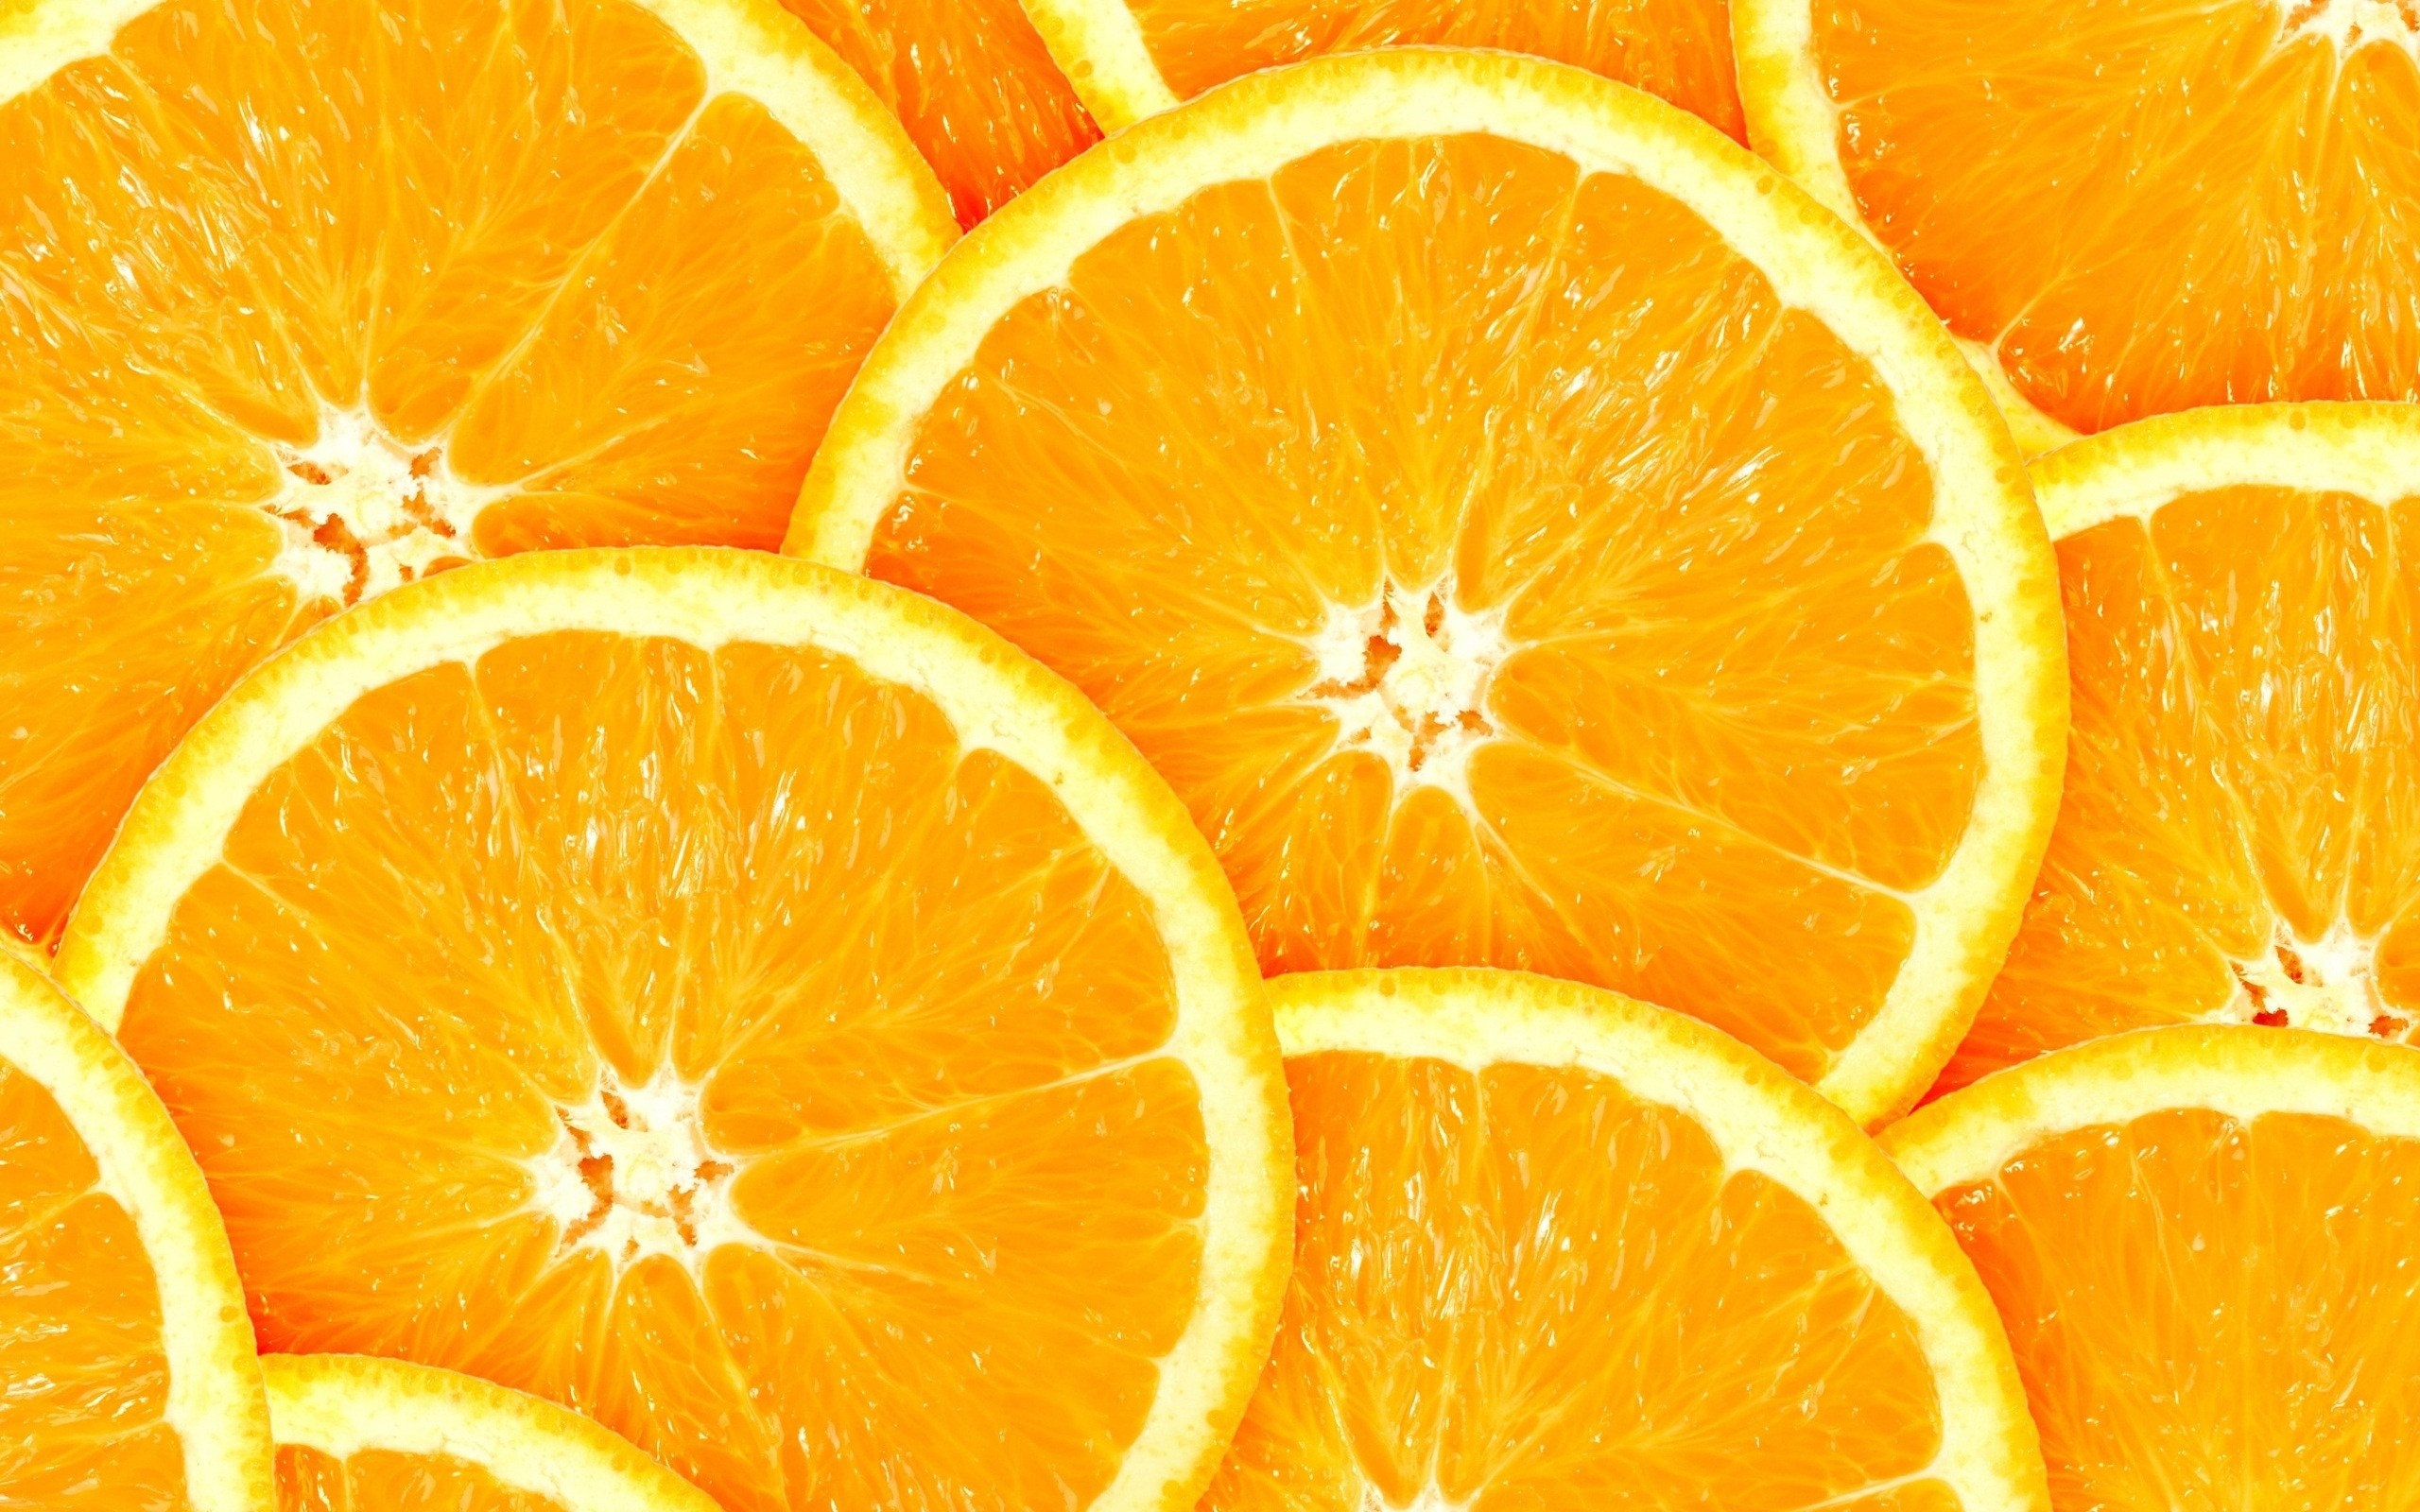 Orange: Round orange-colored fruit that grows on a tree that can reach 10 meters high. 2560x1600 HD Wallpaper.